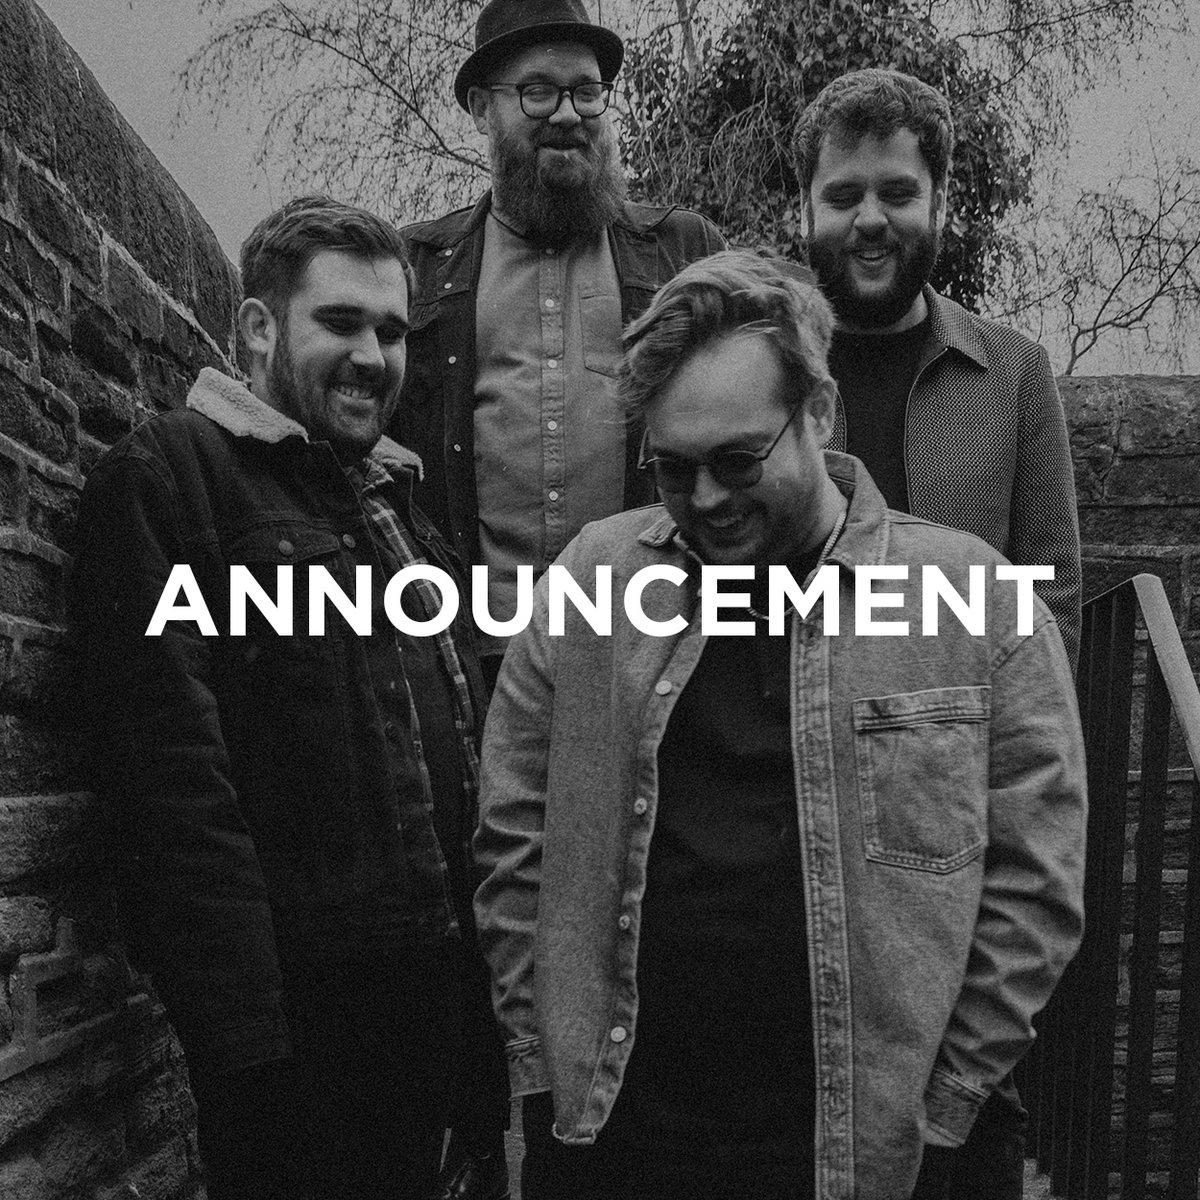 ANNOUNCEMENT - Unfortunately, we have had to pull out of the Smile Bar & Venue show on 1st April 2023. Refunds will be available via loom.ly/1Lc9mAc... With love, Broxtrellez